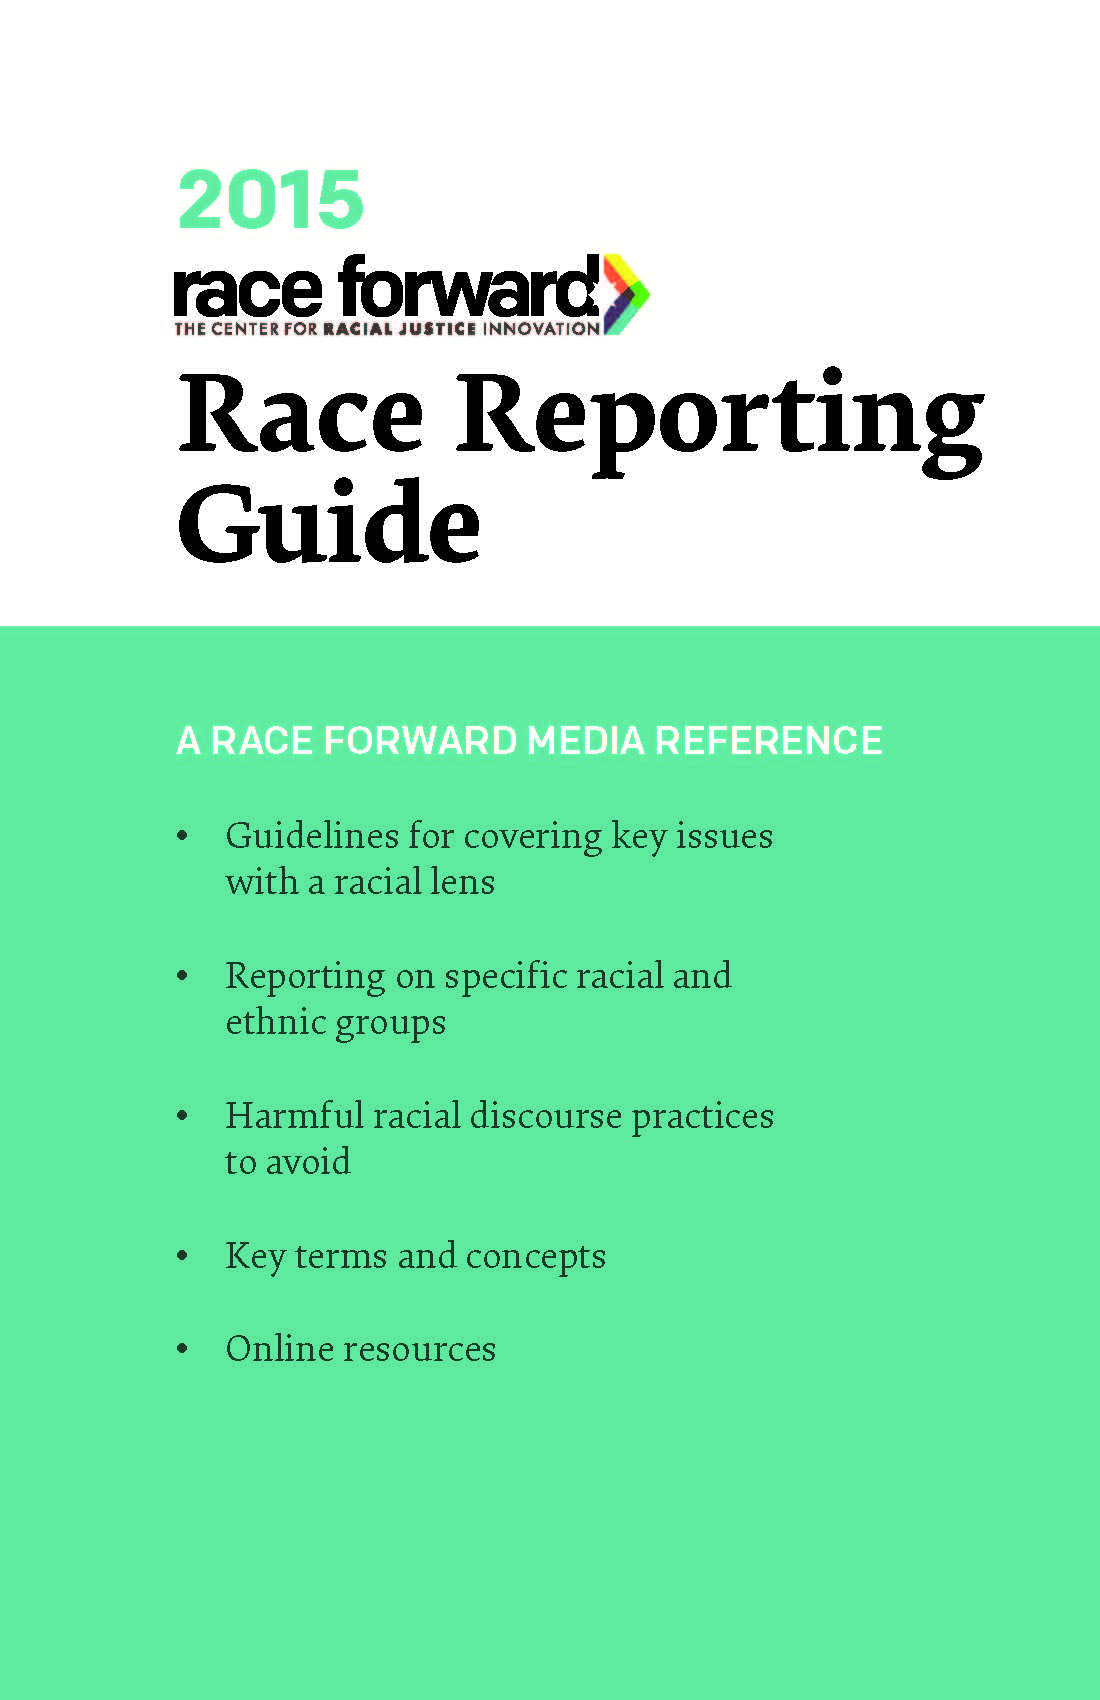 Race Forward’s Race Reporting Guide